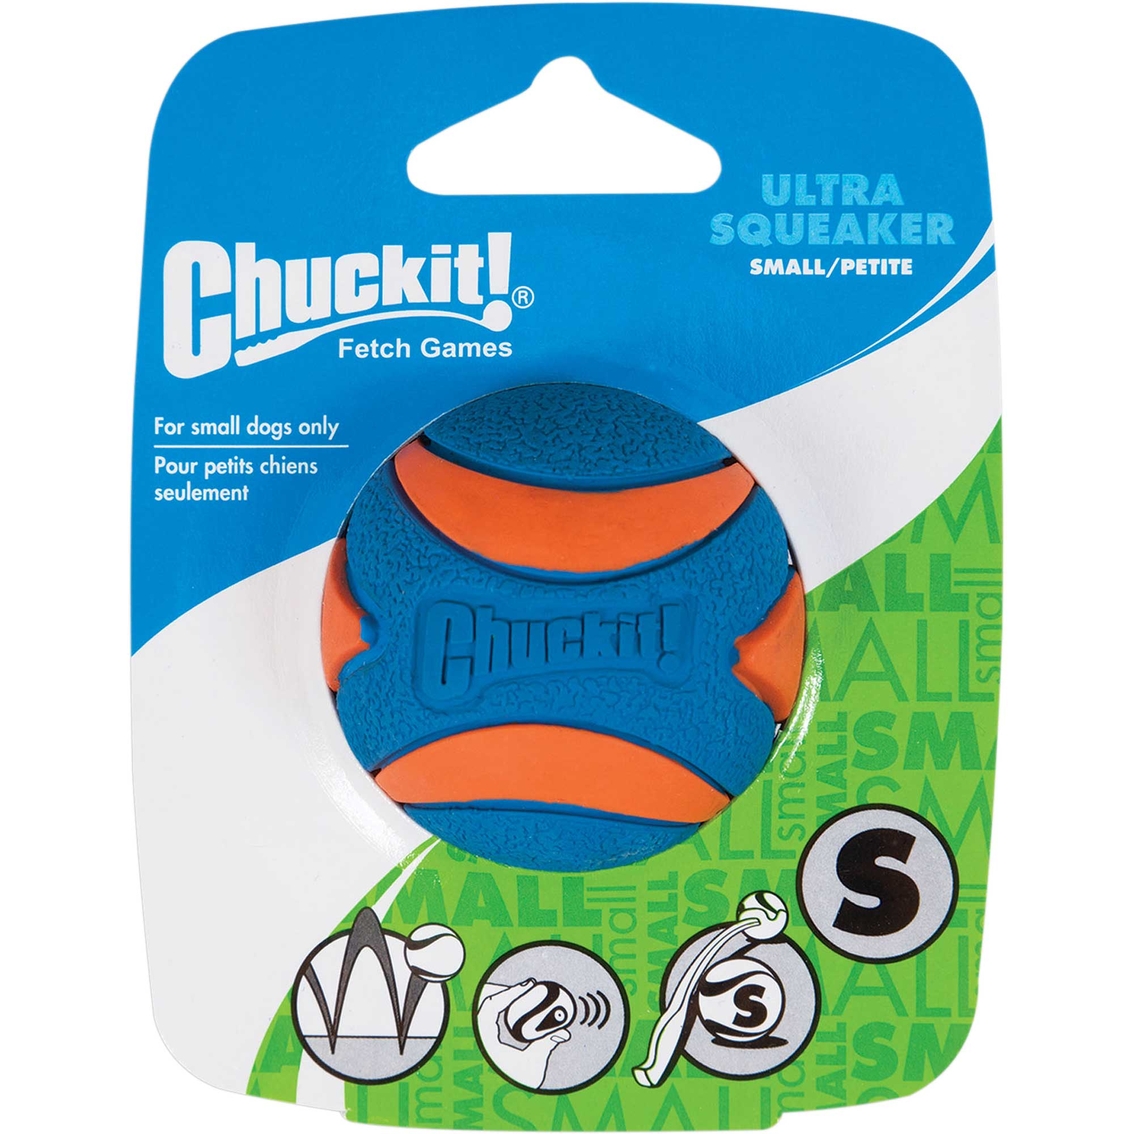 Petmate Chuckit! Ultra Squeaker Ball Large Dog Toy - Image 5 of 5